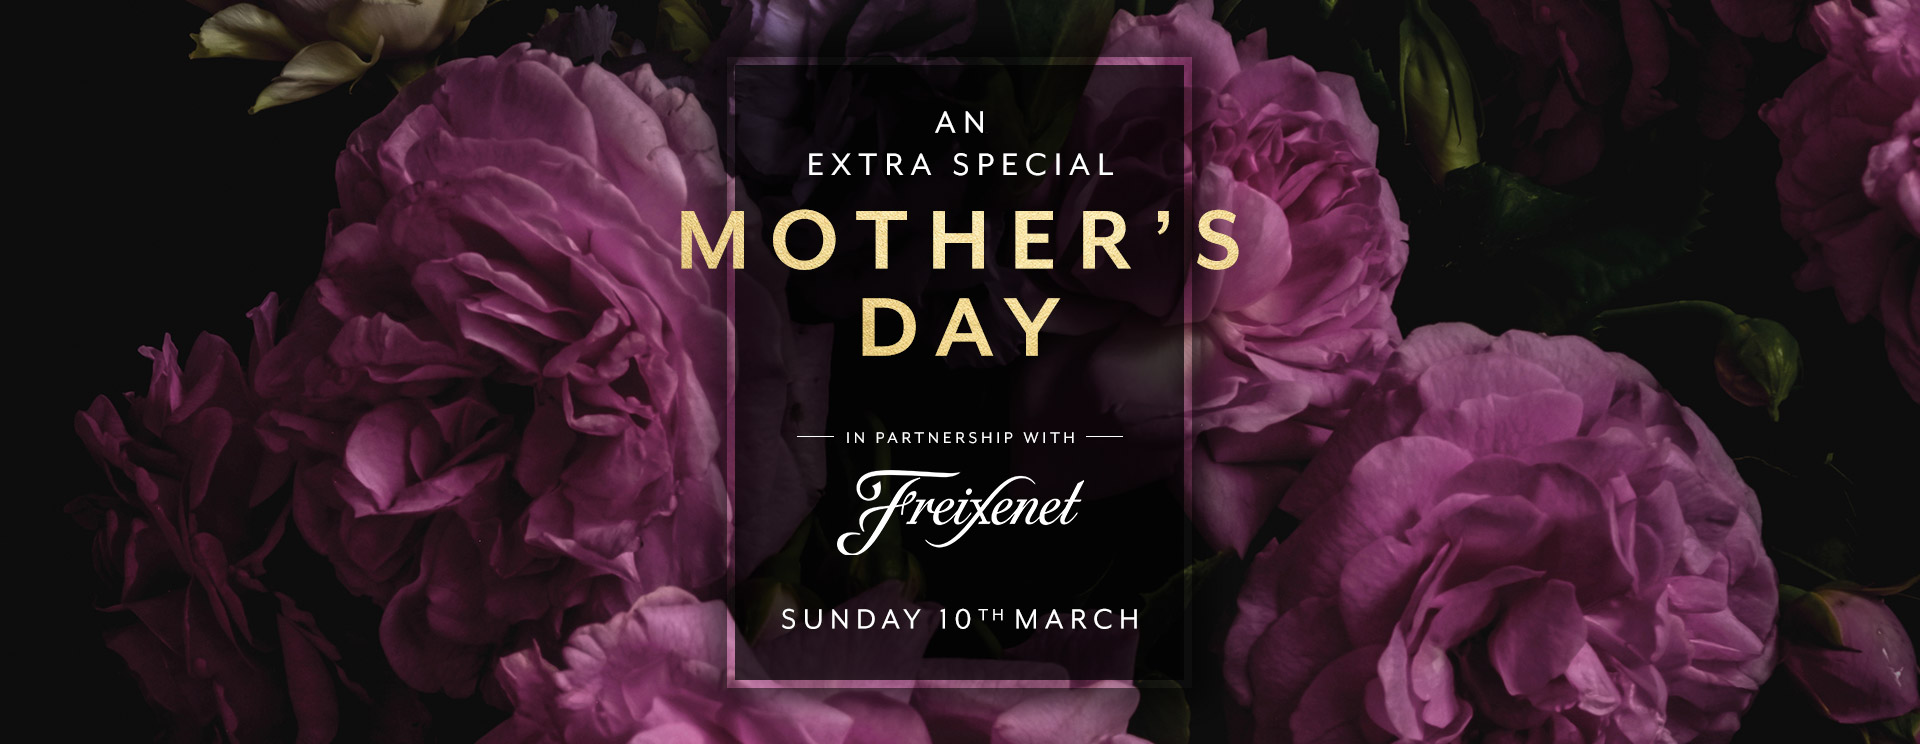 Mother’s Day menu/meal in Kings Langley